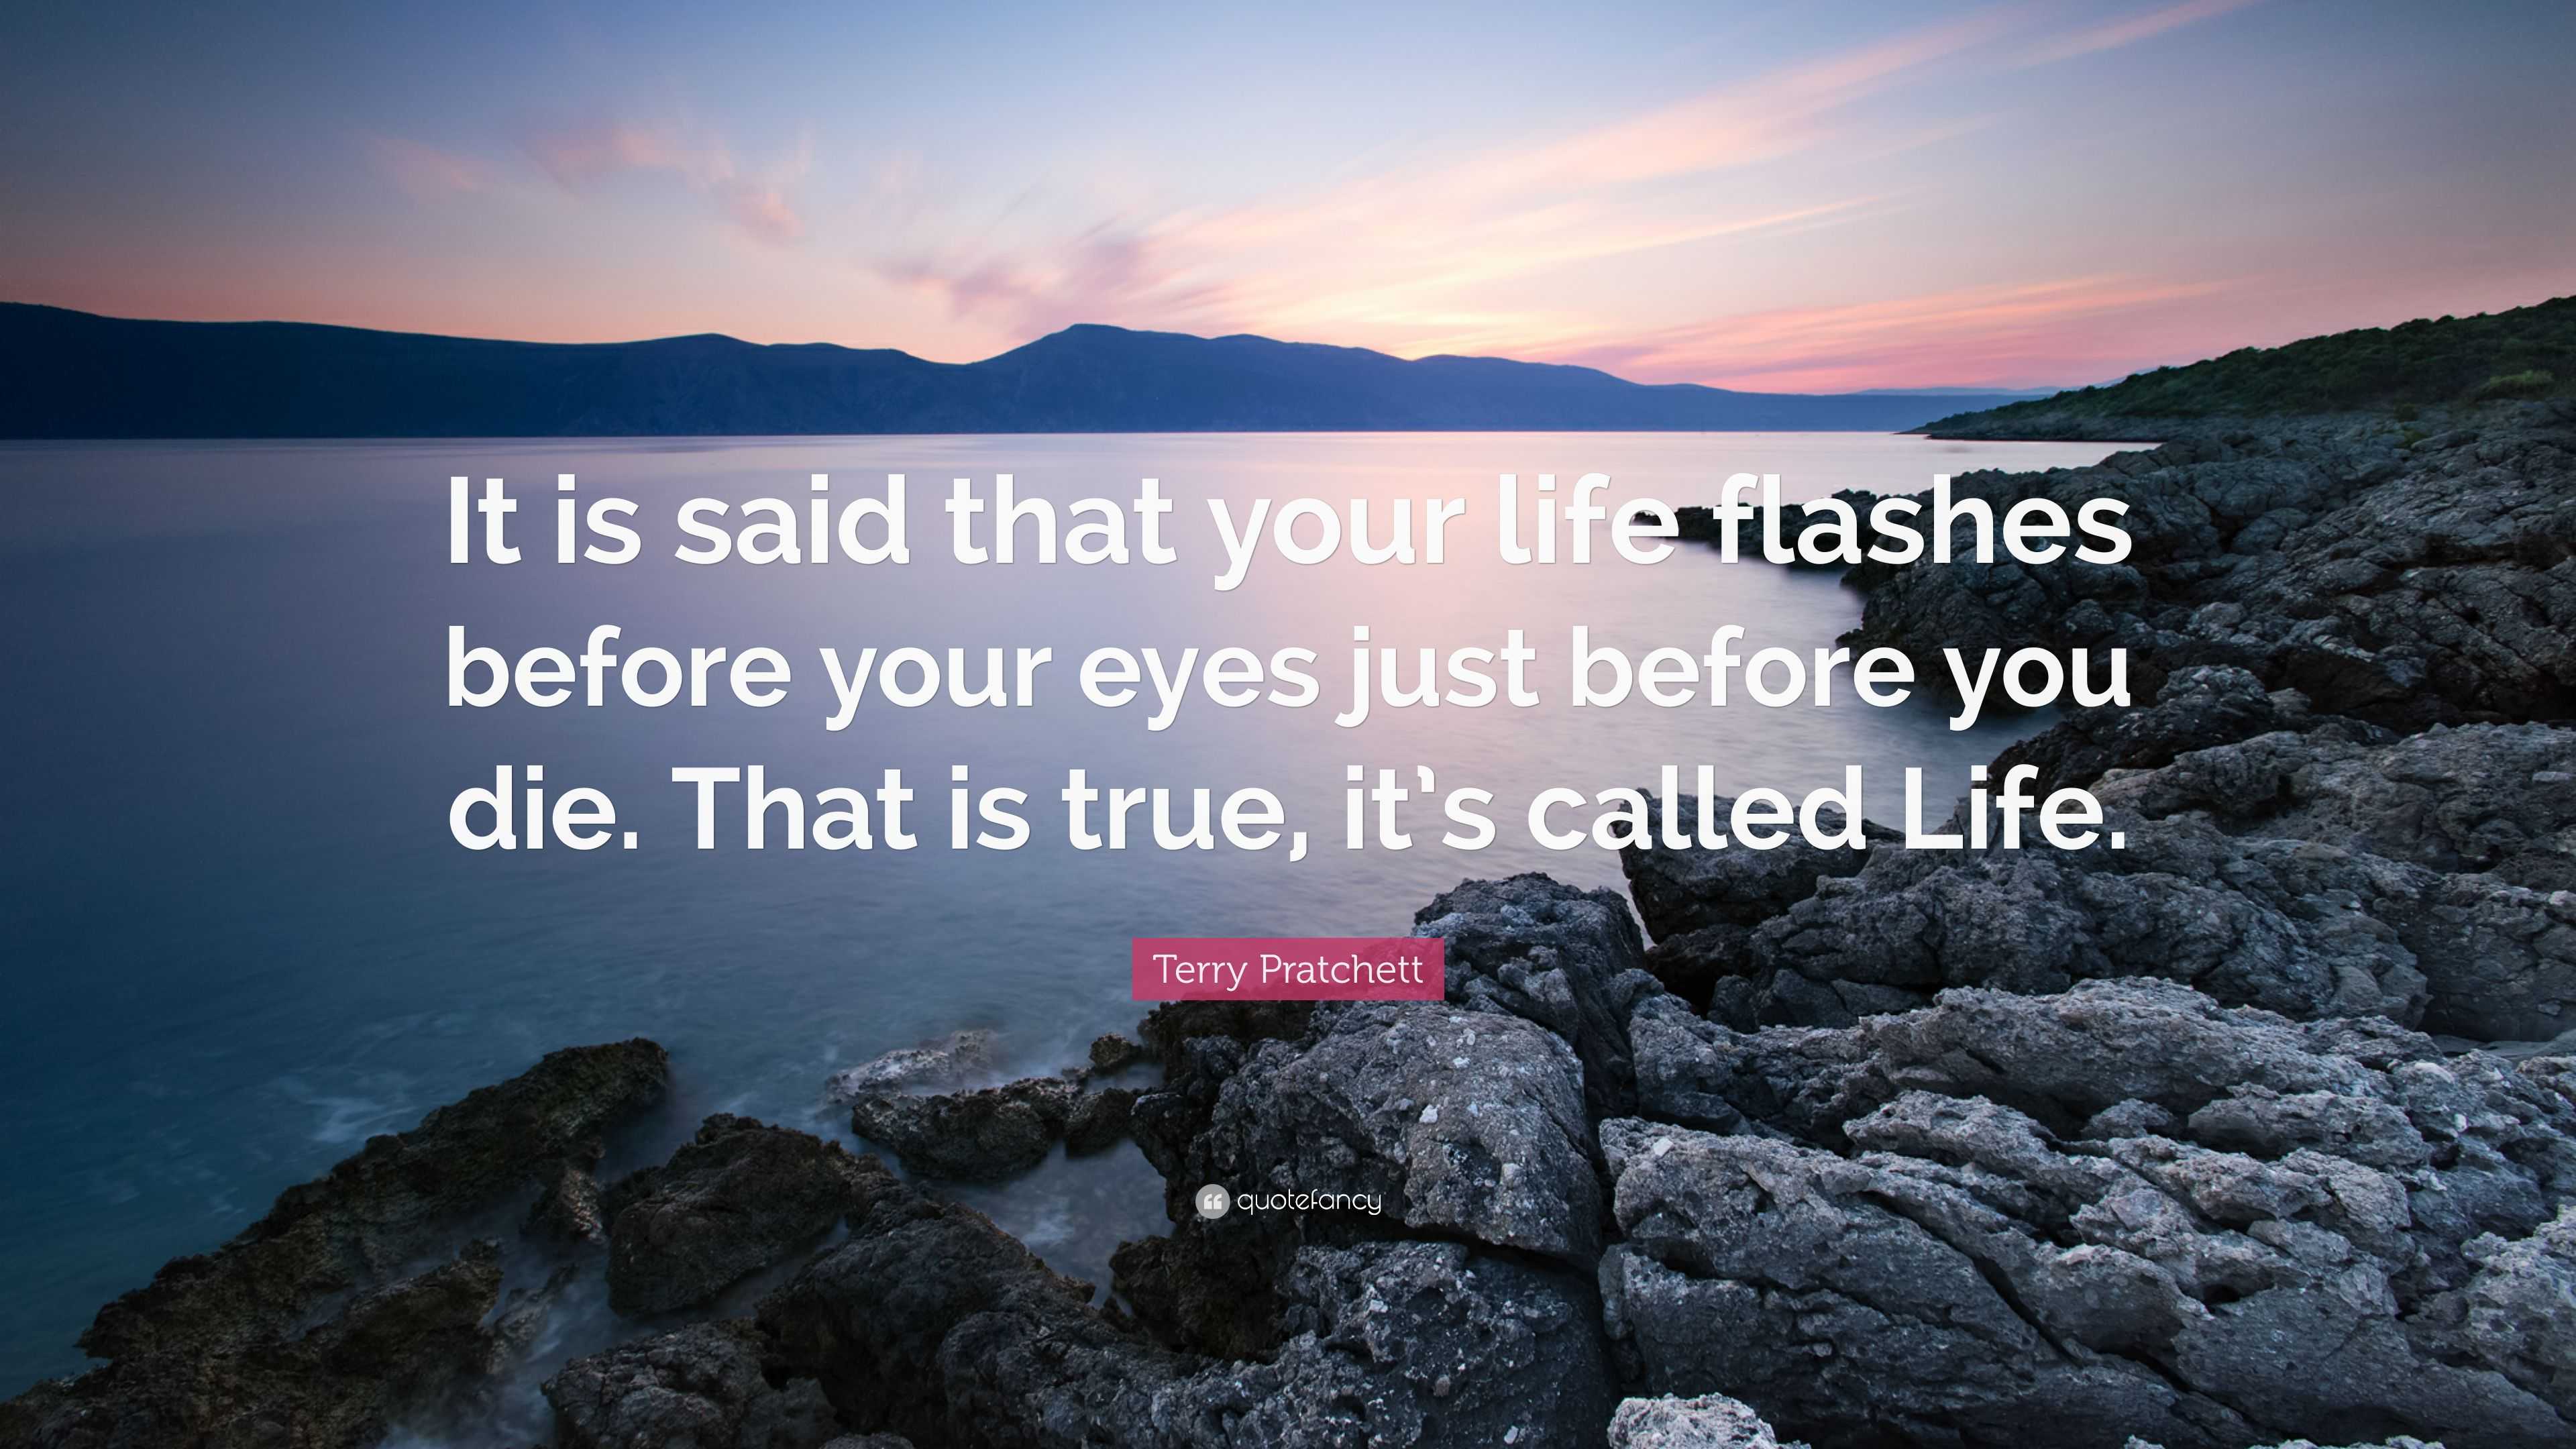 life flashes before your eyes death myths